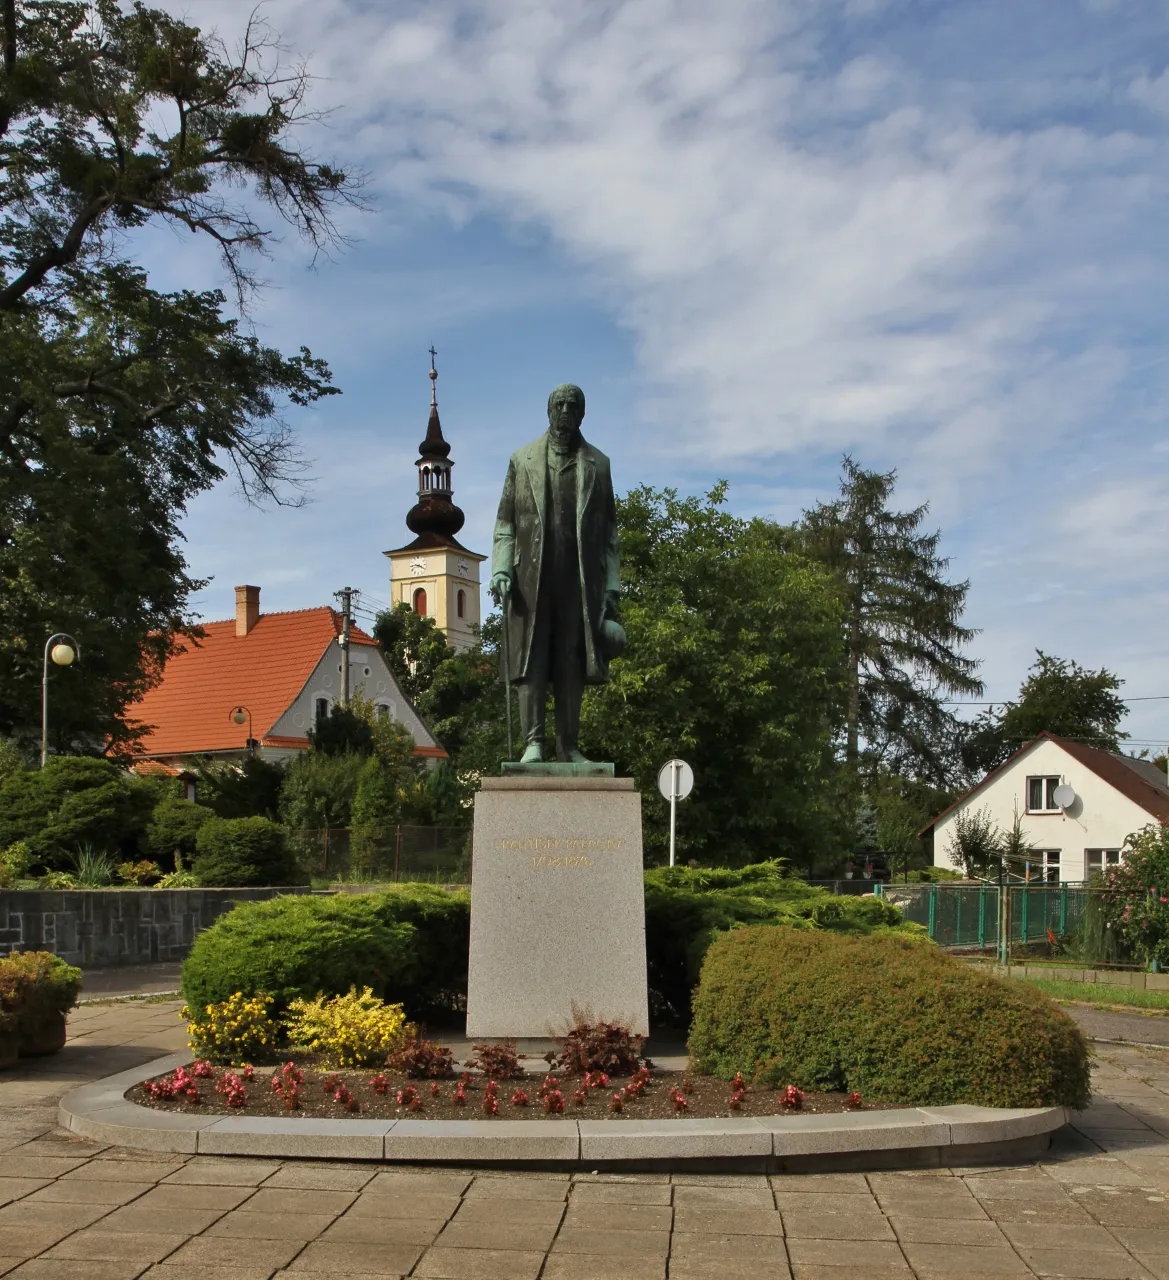 Photo showing: Statue of František Palacký in Hodslavice, Czech Republic, with the steeple of the Evangelical Church in the background